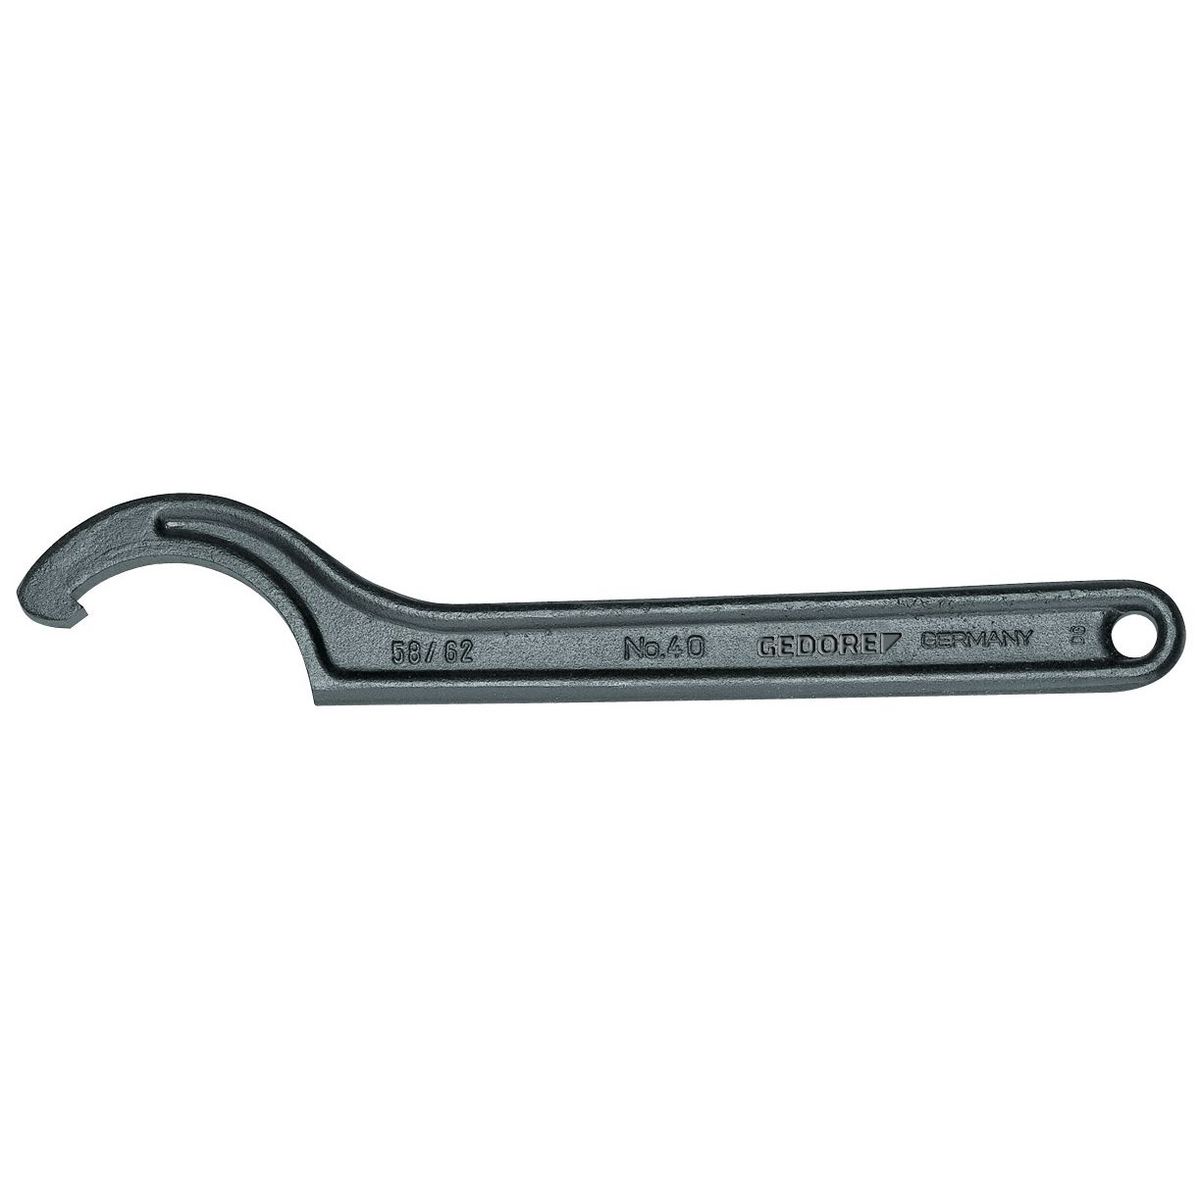 Hook wrench with lug, 52-55mm No.40 52-55 Gedore